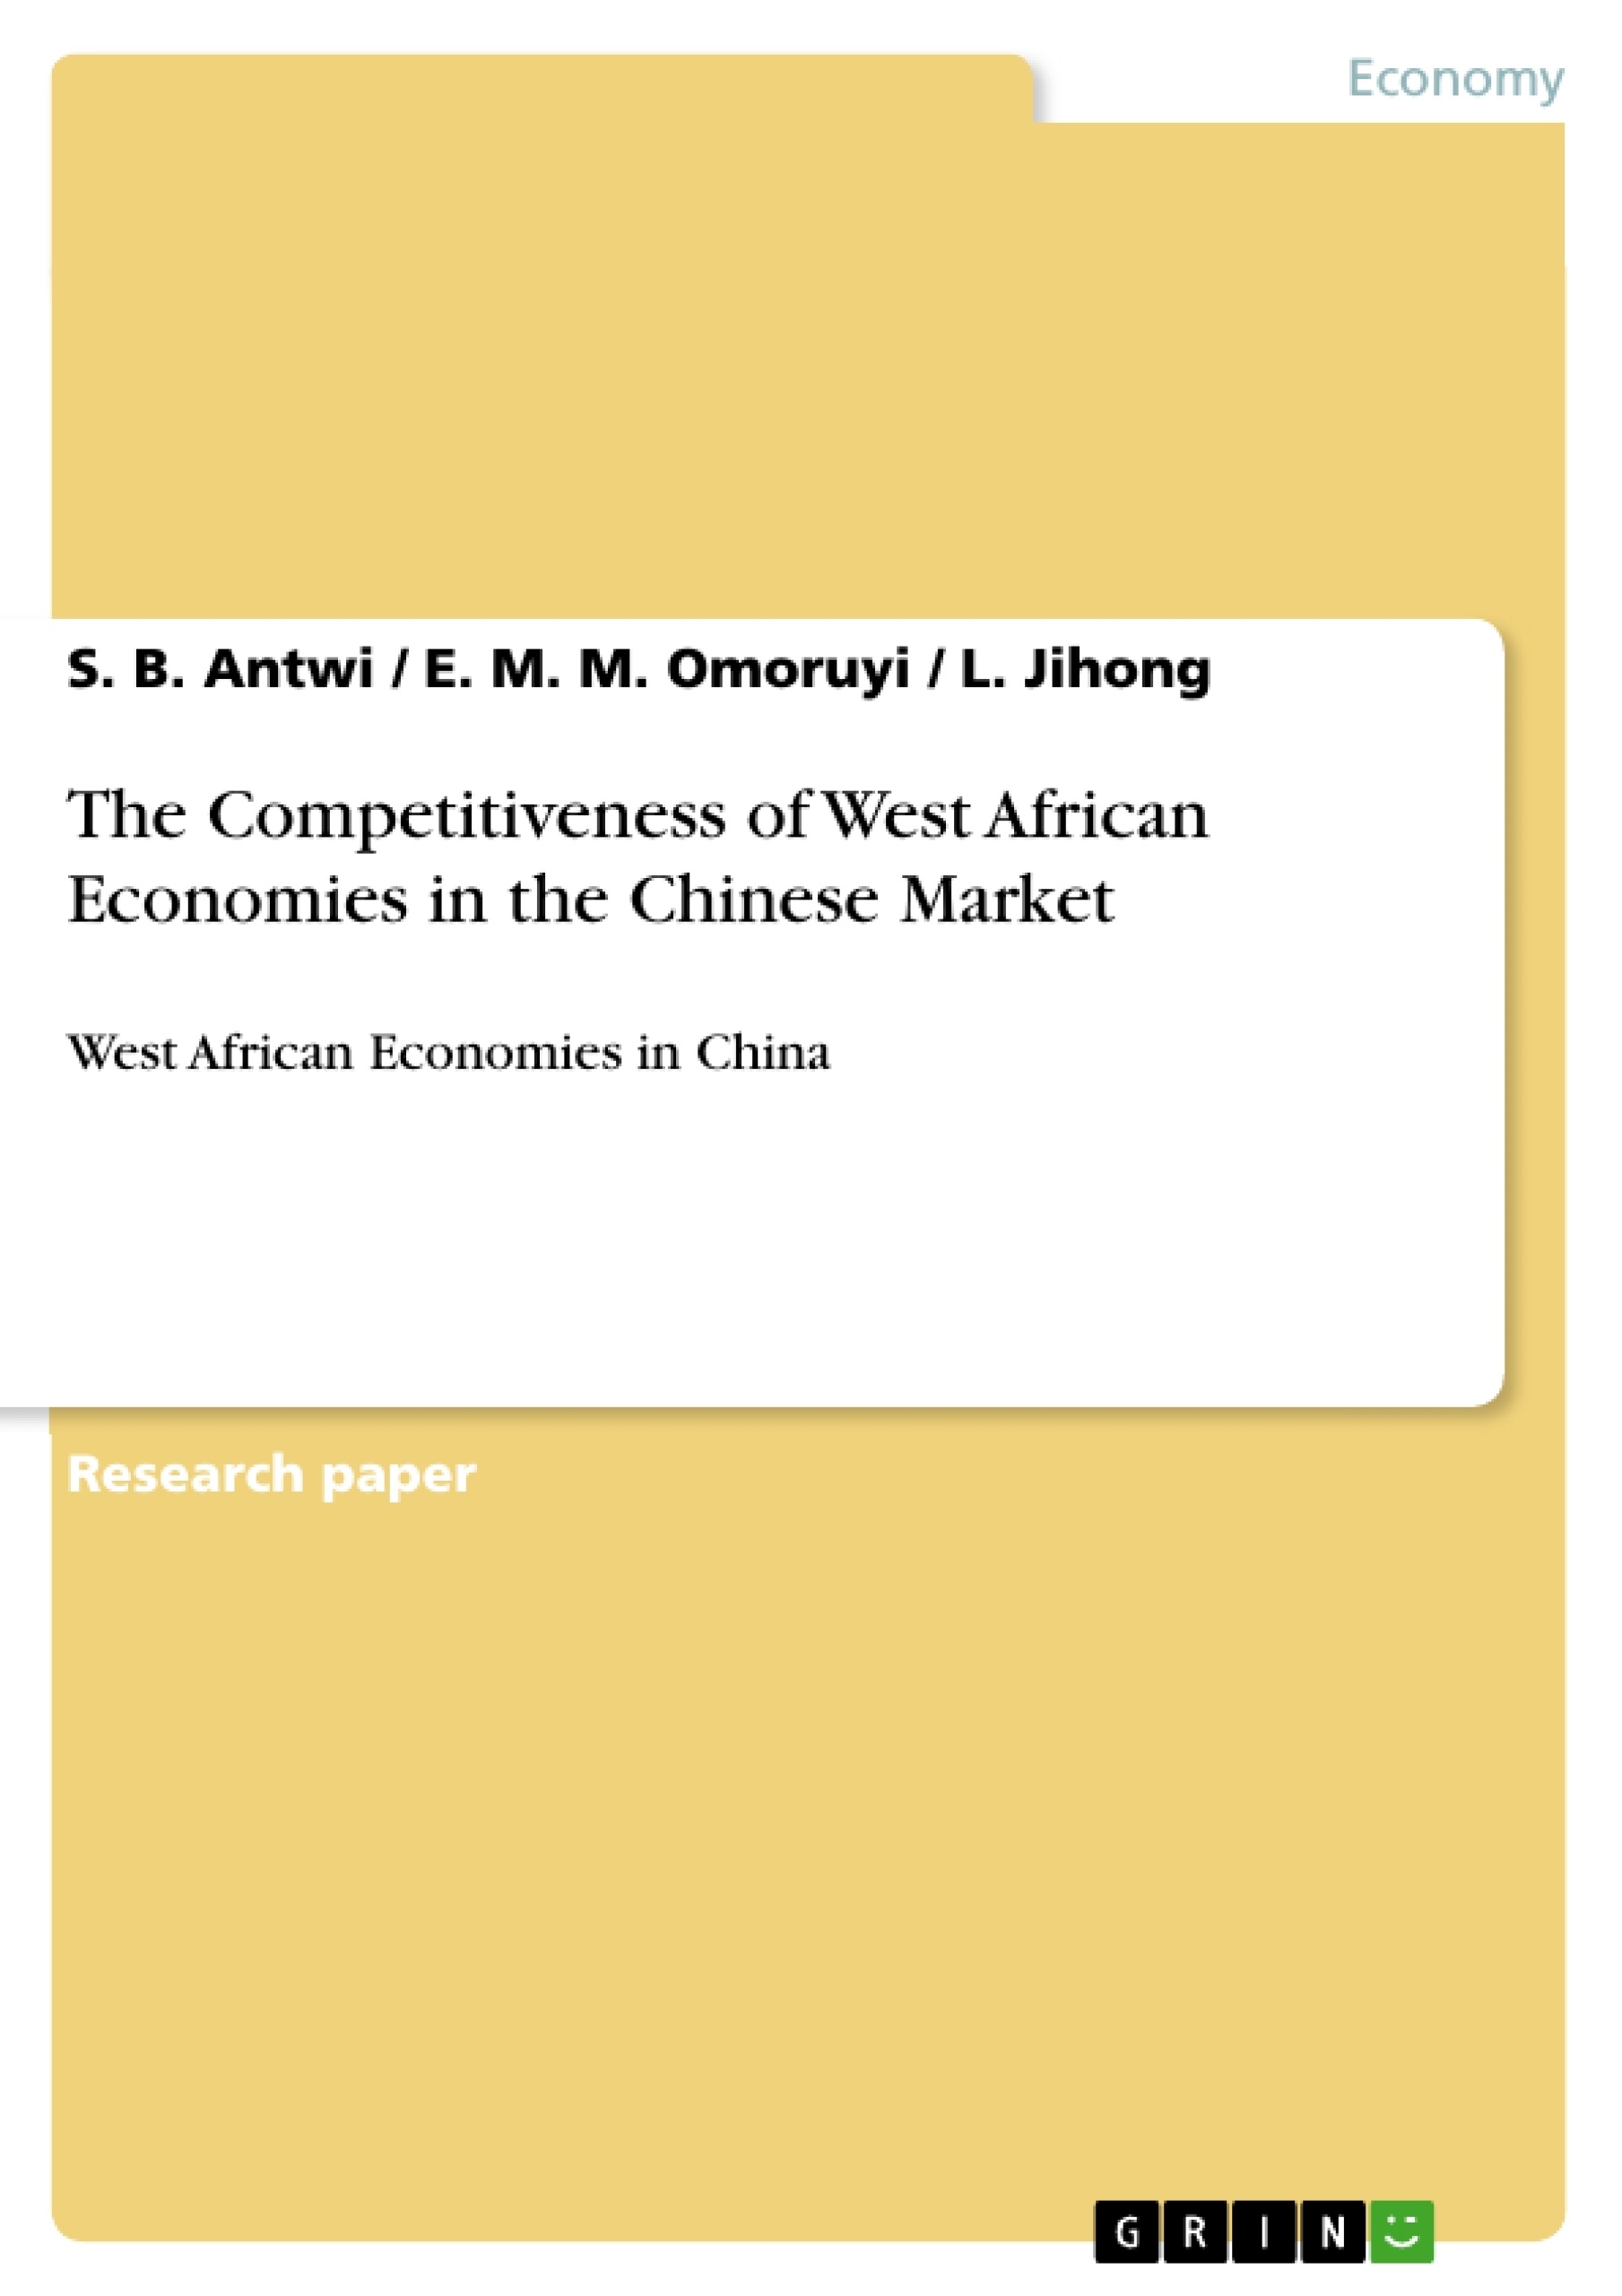 Título: The Competitiveness of West African Economies in the Chinese Market